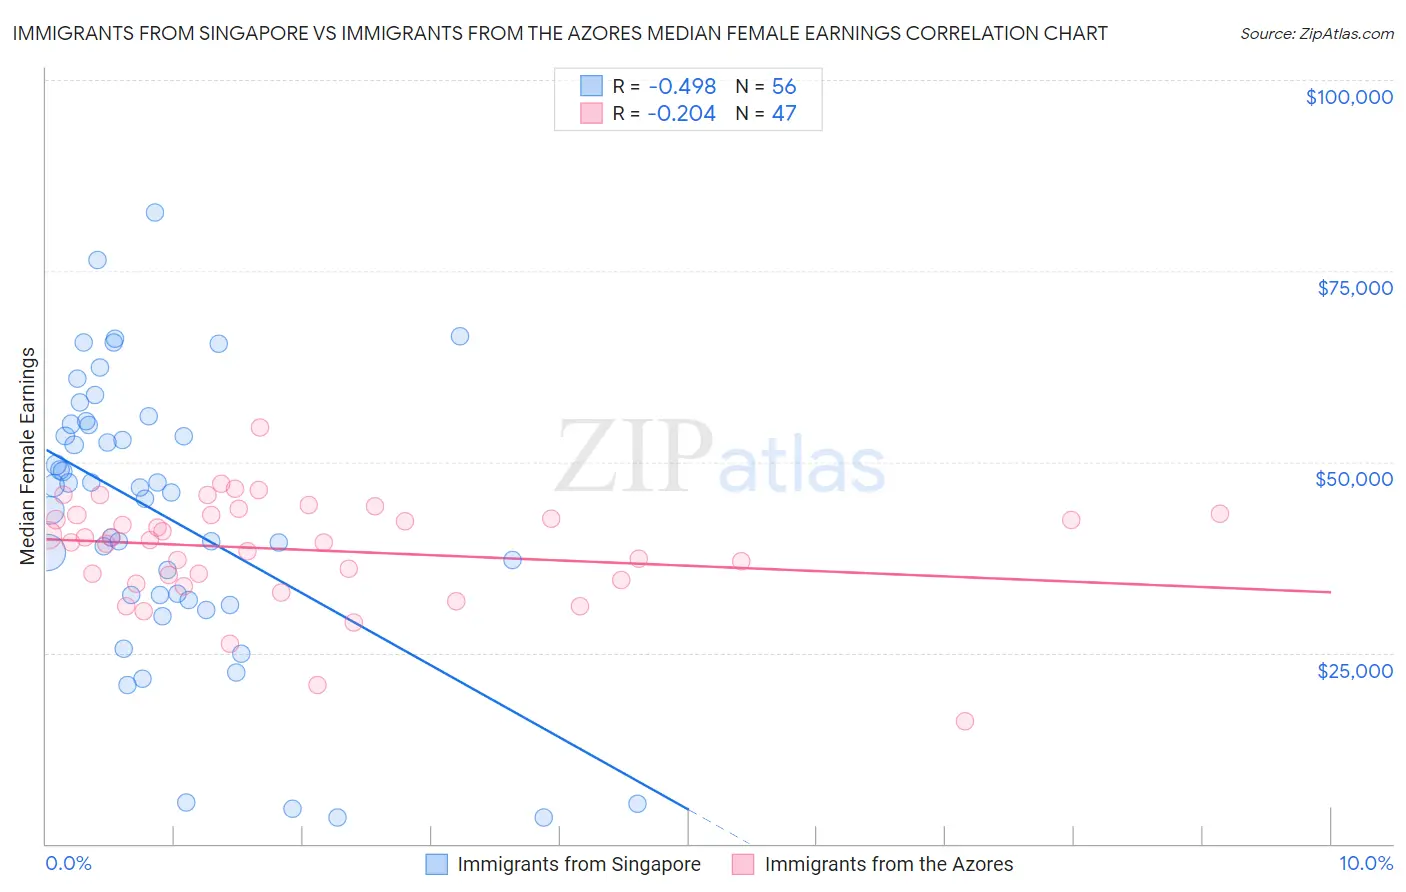 Immigrants from Singapore vs Immigrants from the Azores Median Female Earnings